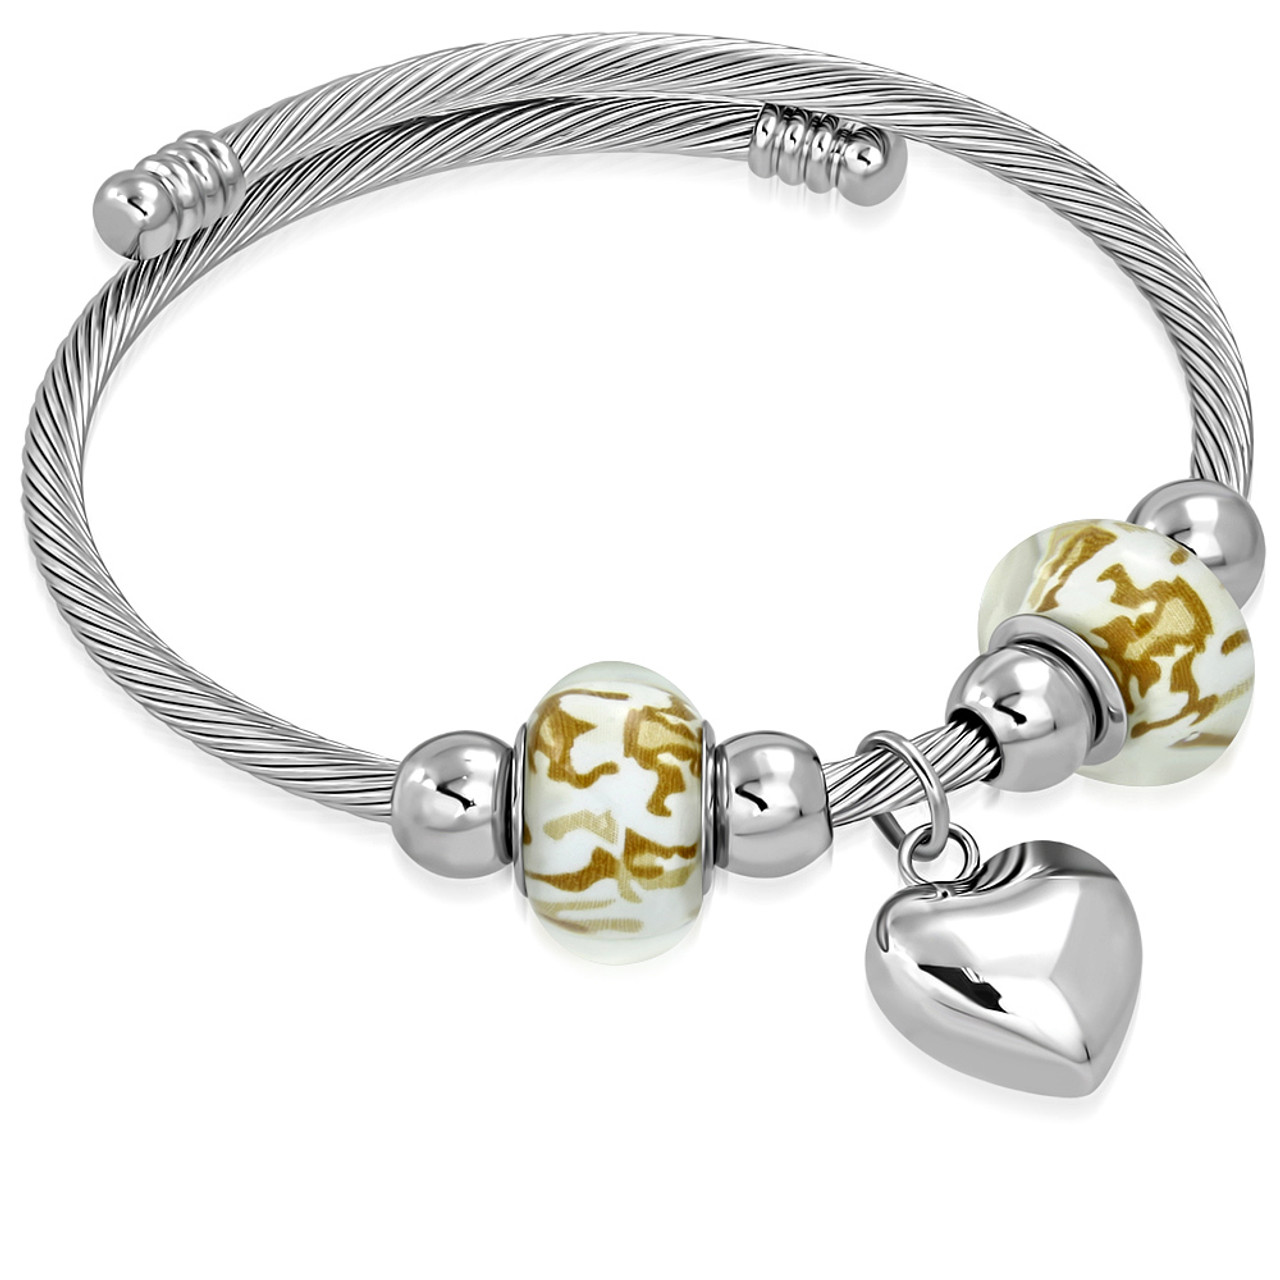 Monogram Charm Bracelet Engraved Pendant and Pearl Bracelet in Brushed Silver or Gold Personalized Jewlery